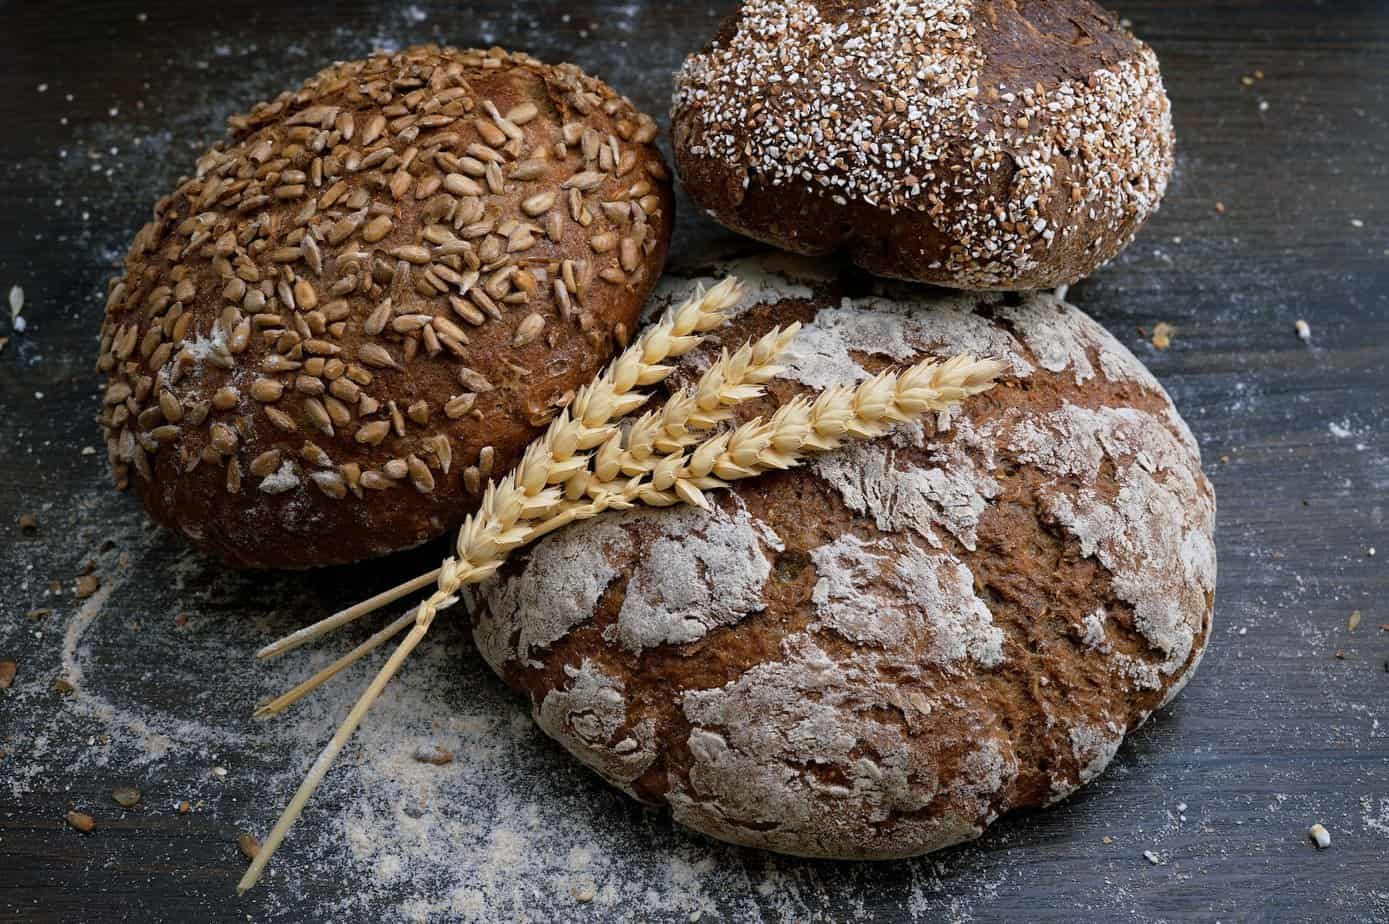 Dark bread always healthier than light bread? Don’t be fooled by stereotypes!